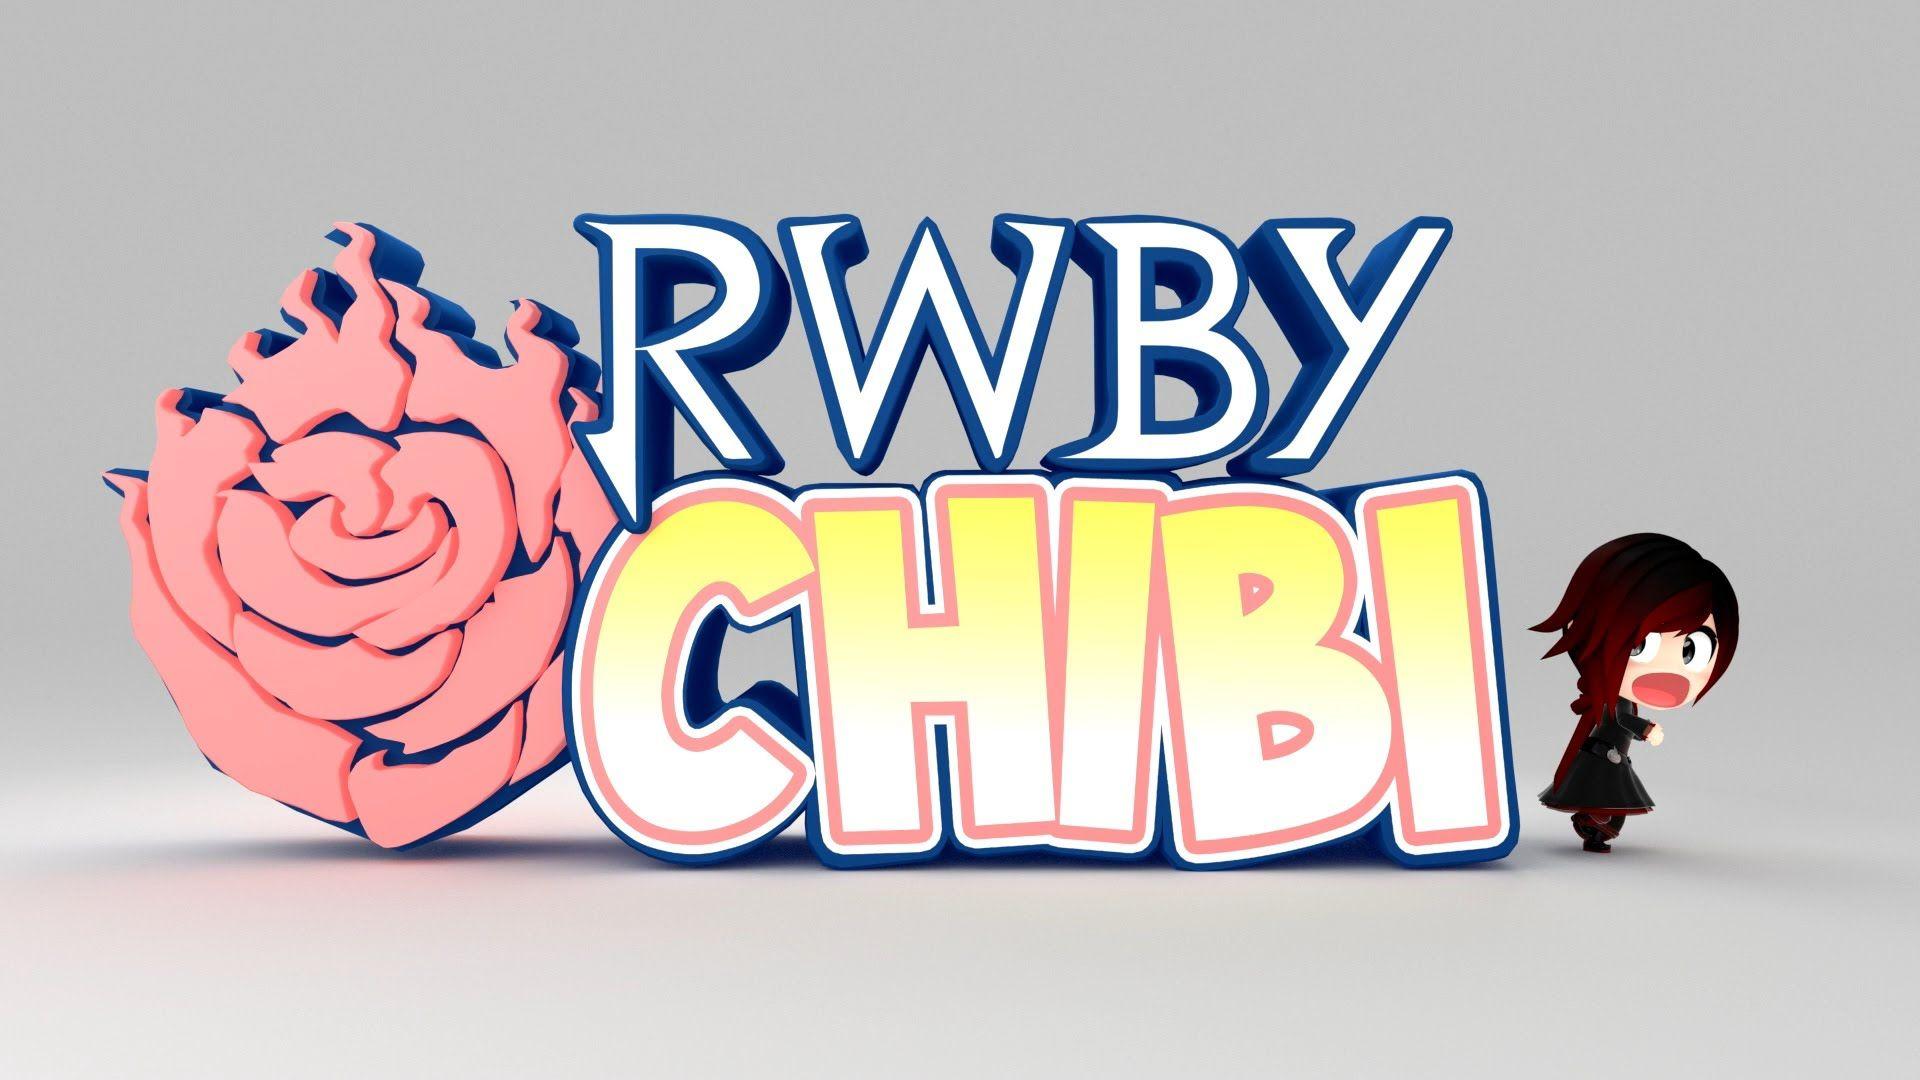 What are Your Thoughts on the new RWBY Chibi Series?